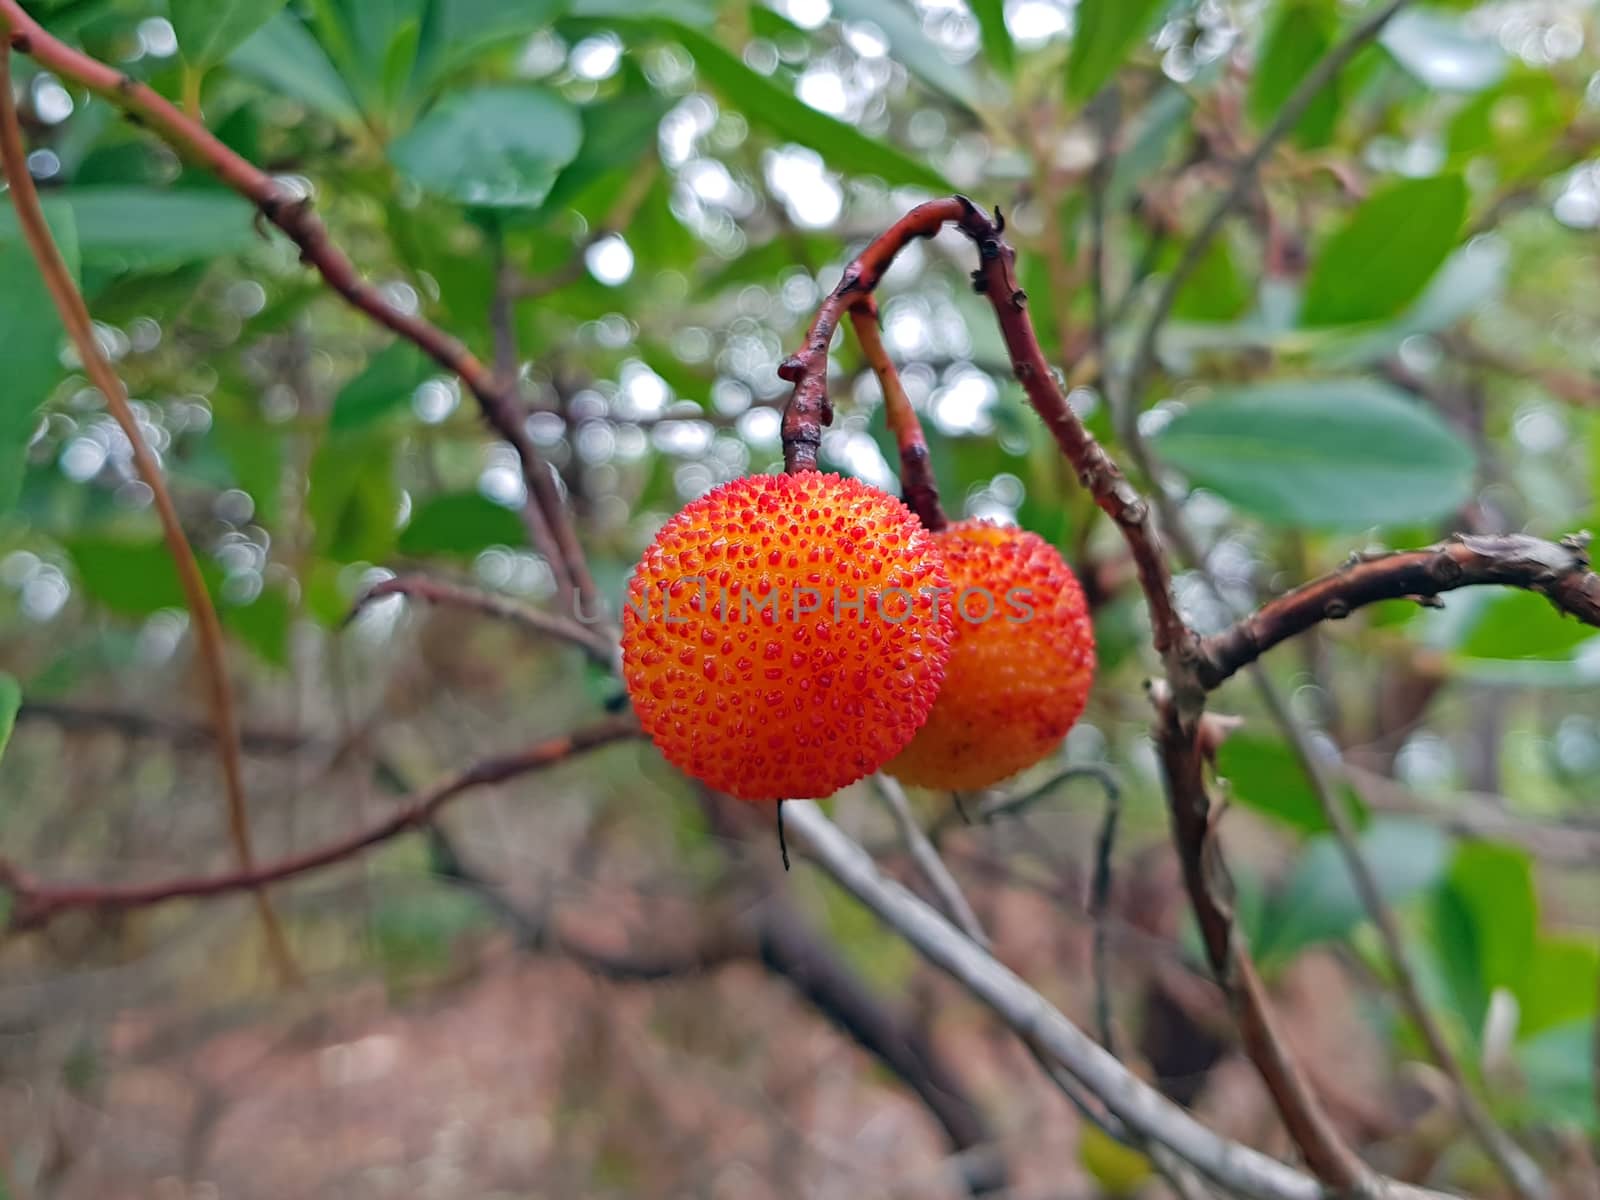 Medronho fruits on a tree ready to be harvest by devy